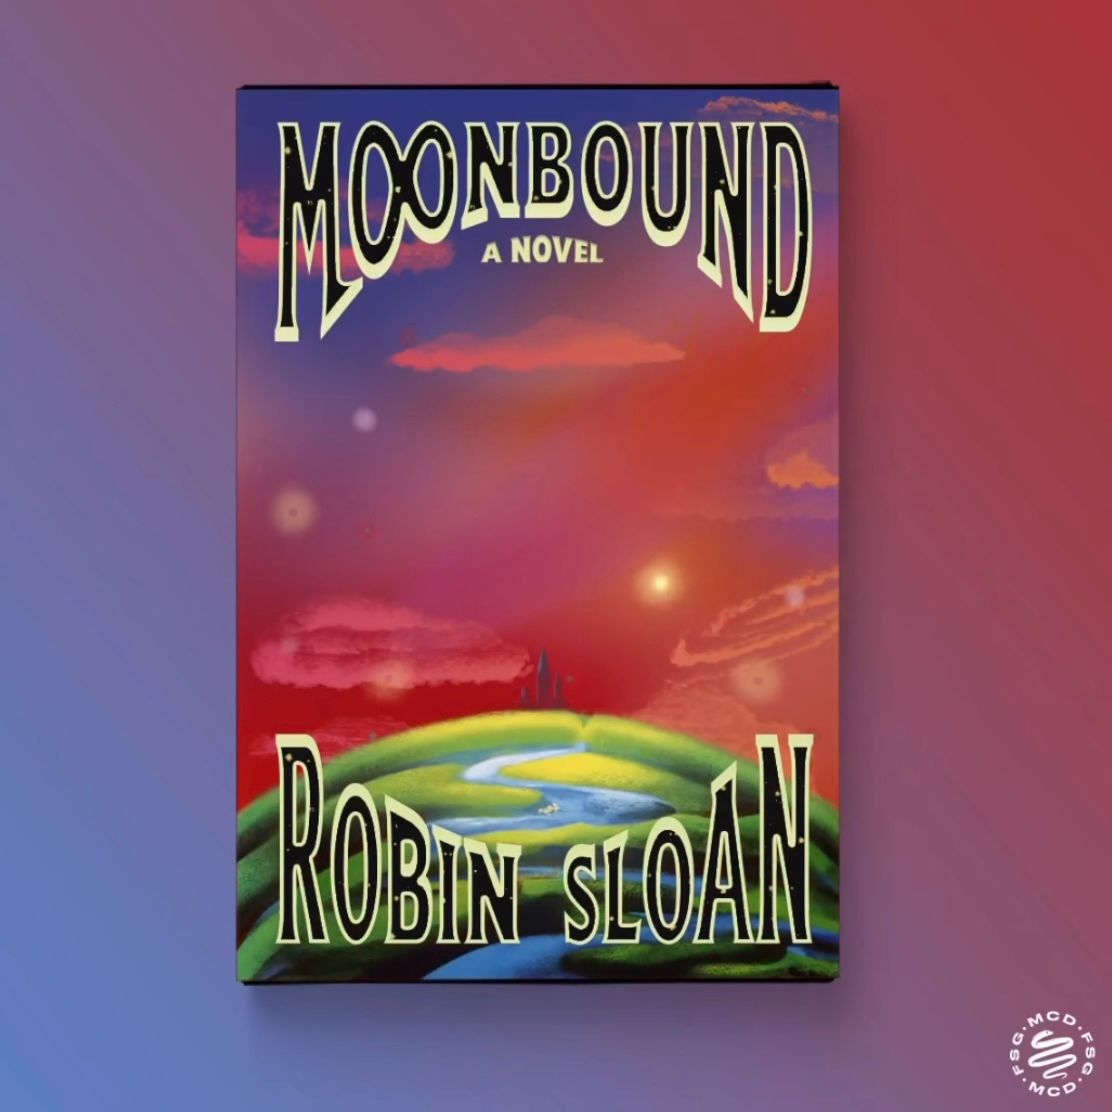 New upcoming Robin Sloan expected for June! Pre-order through our website now! @fsgbooks